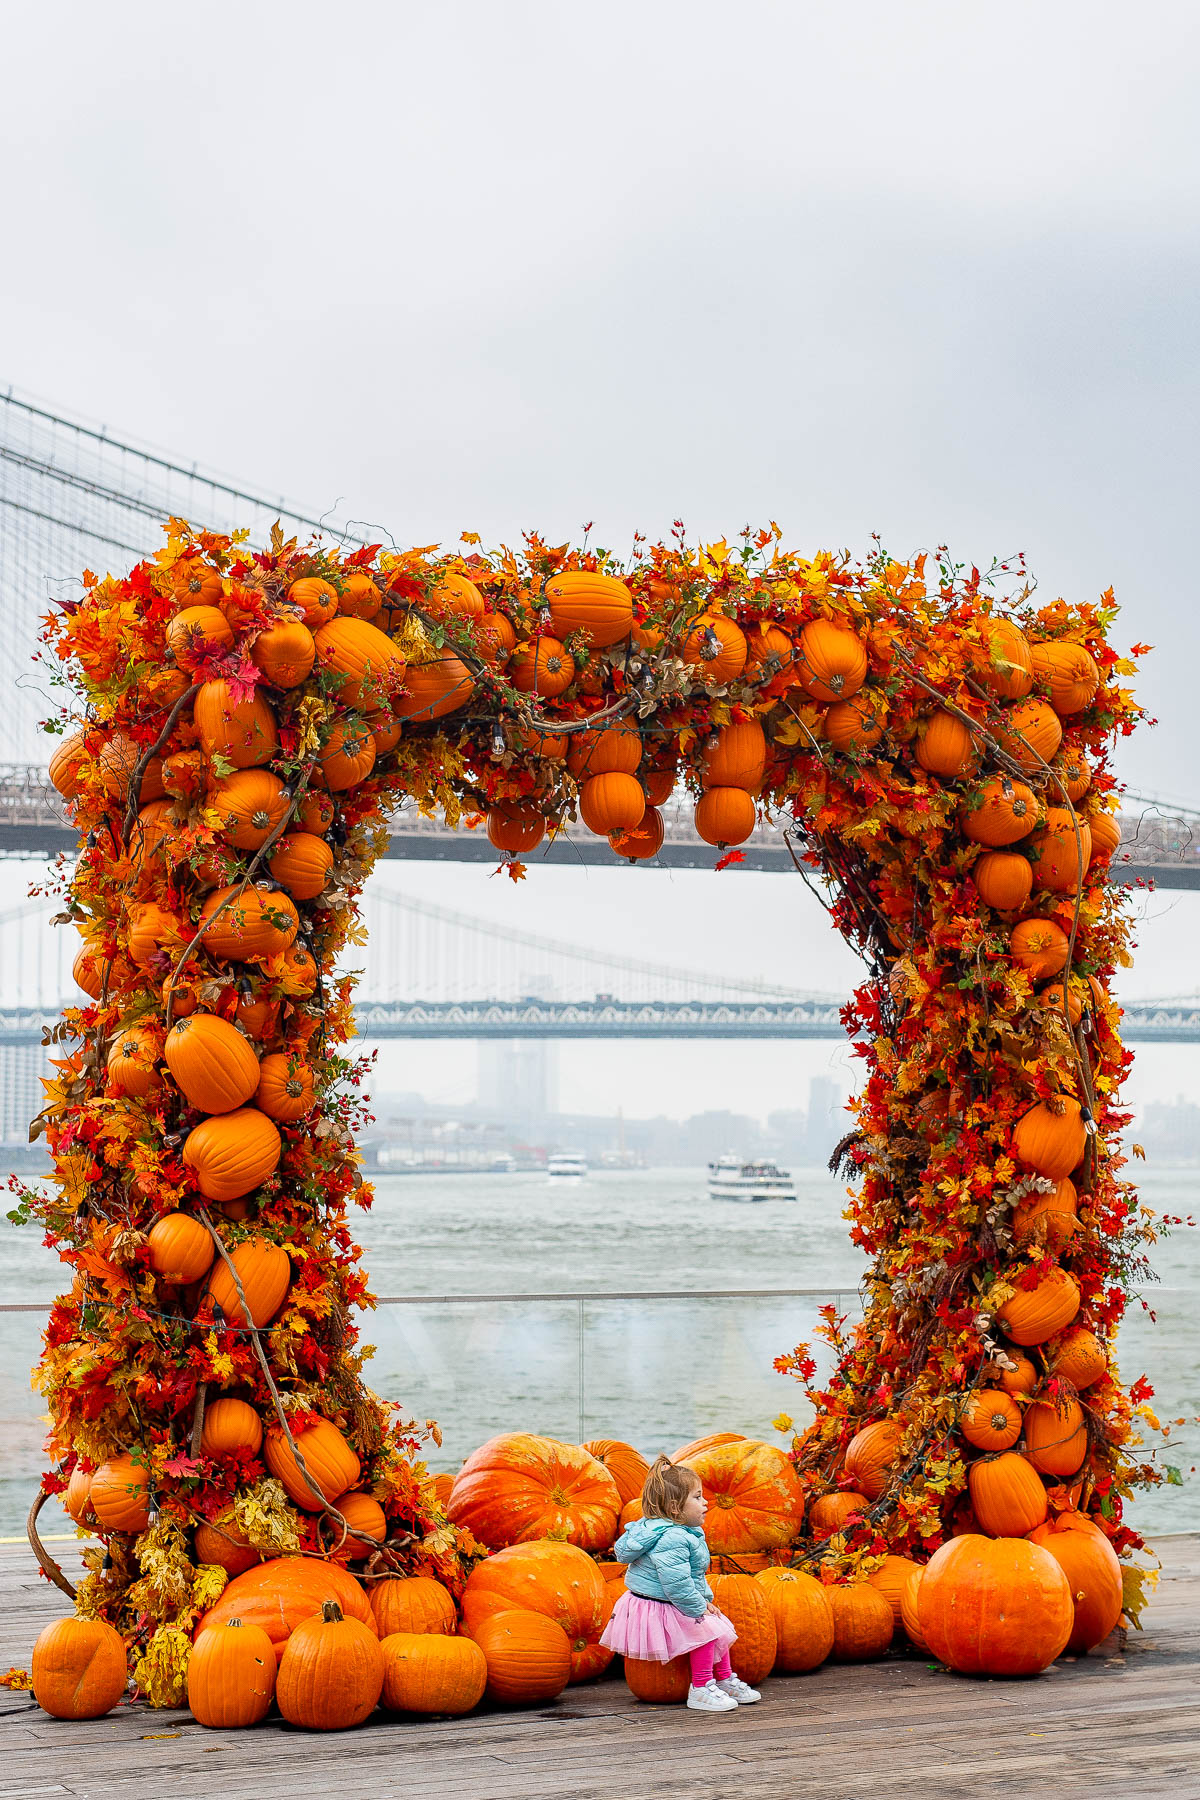 Pumpkin Arch Pier 17, Things to Do on Halloween in New York City